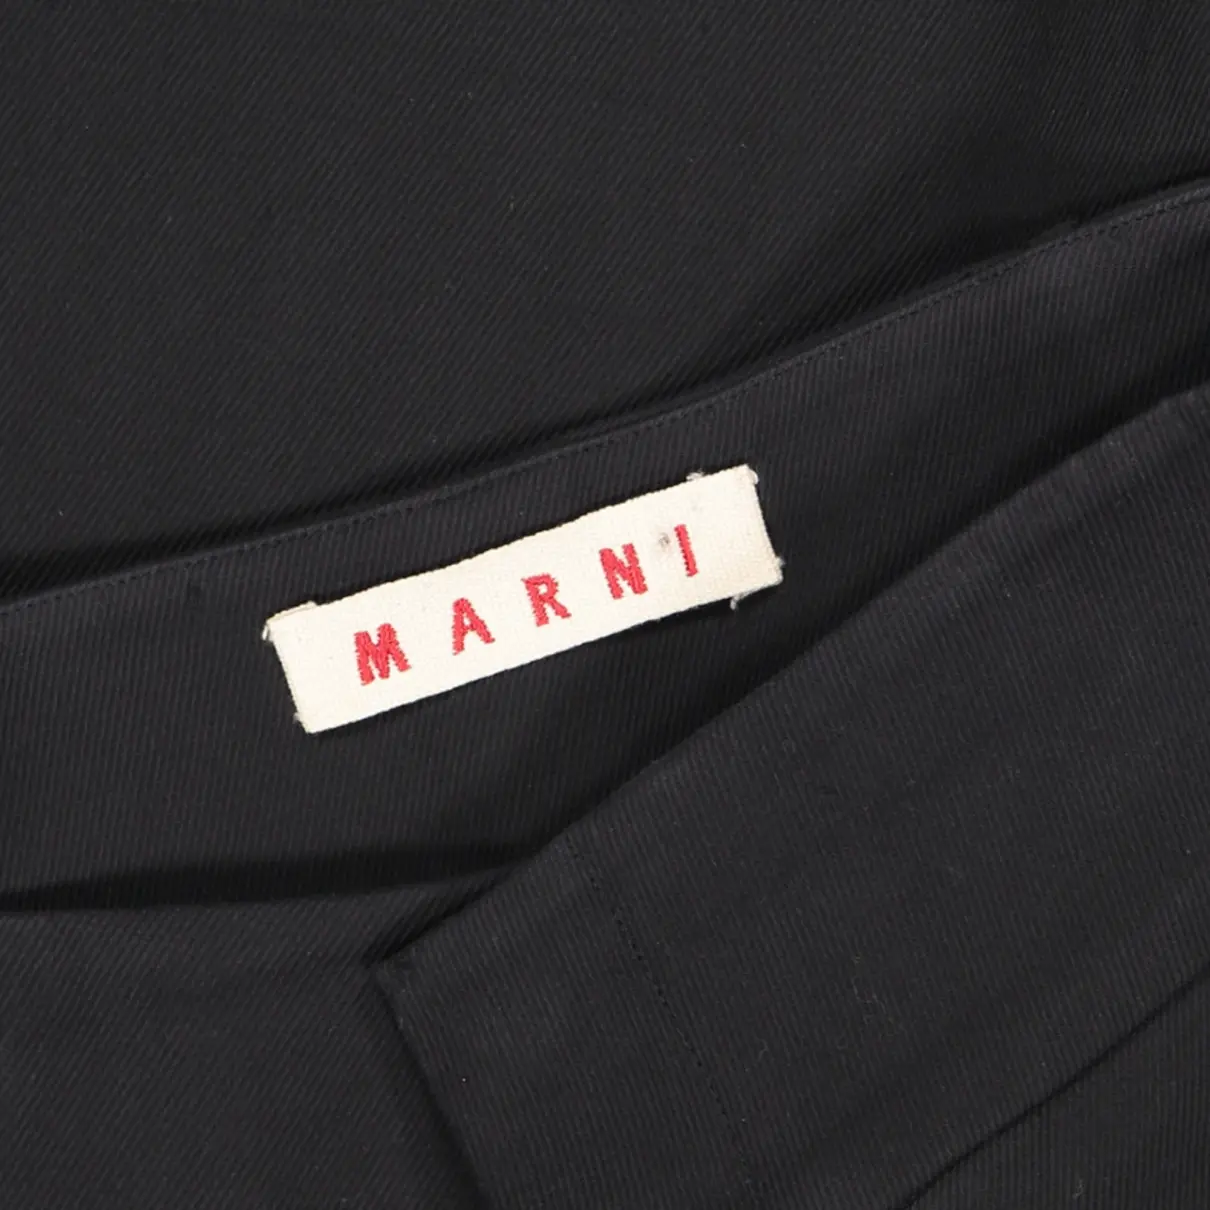 Buy Marni Anthracite Cotton Shorts online